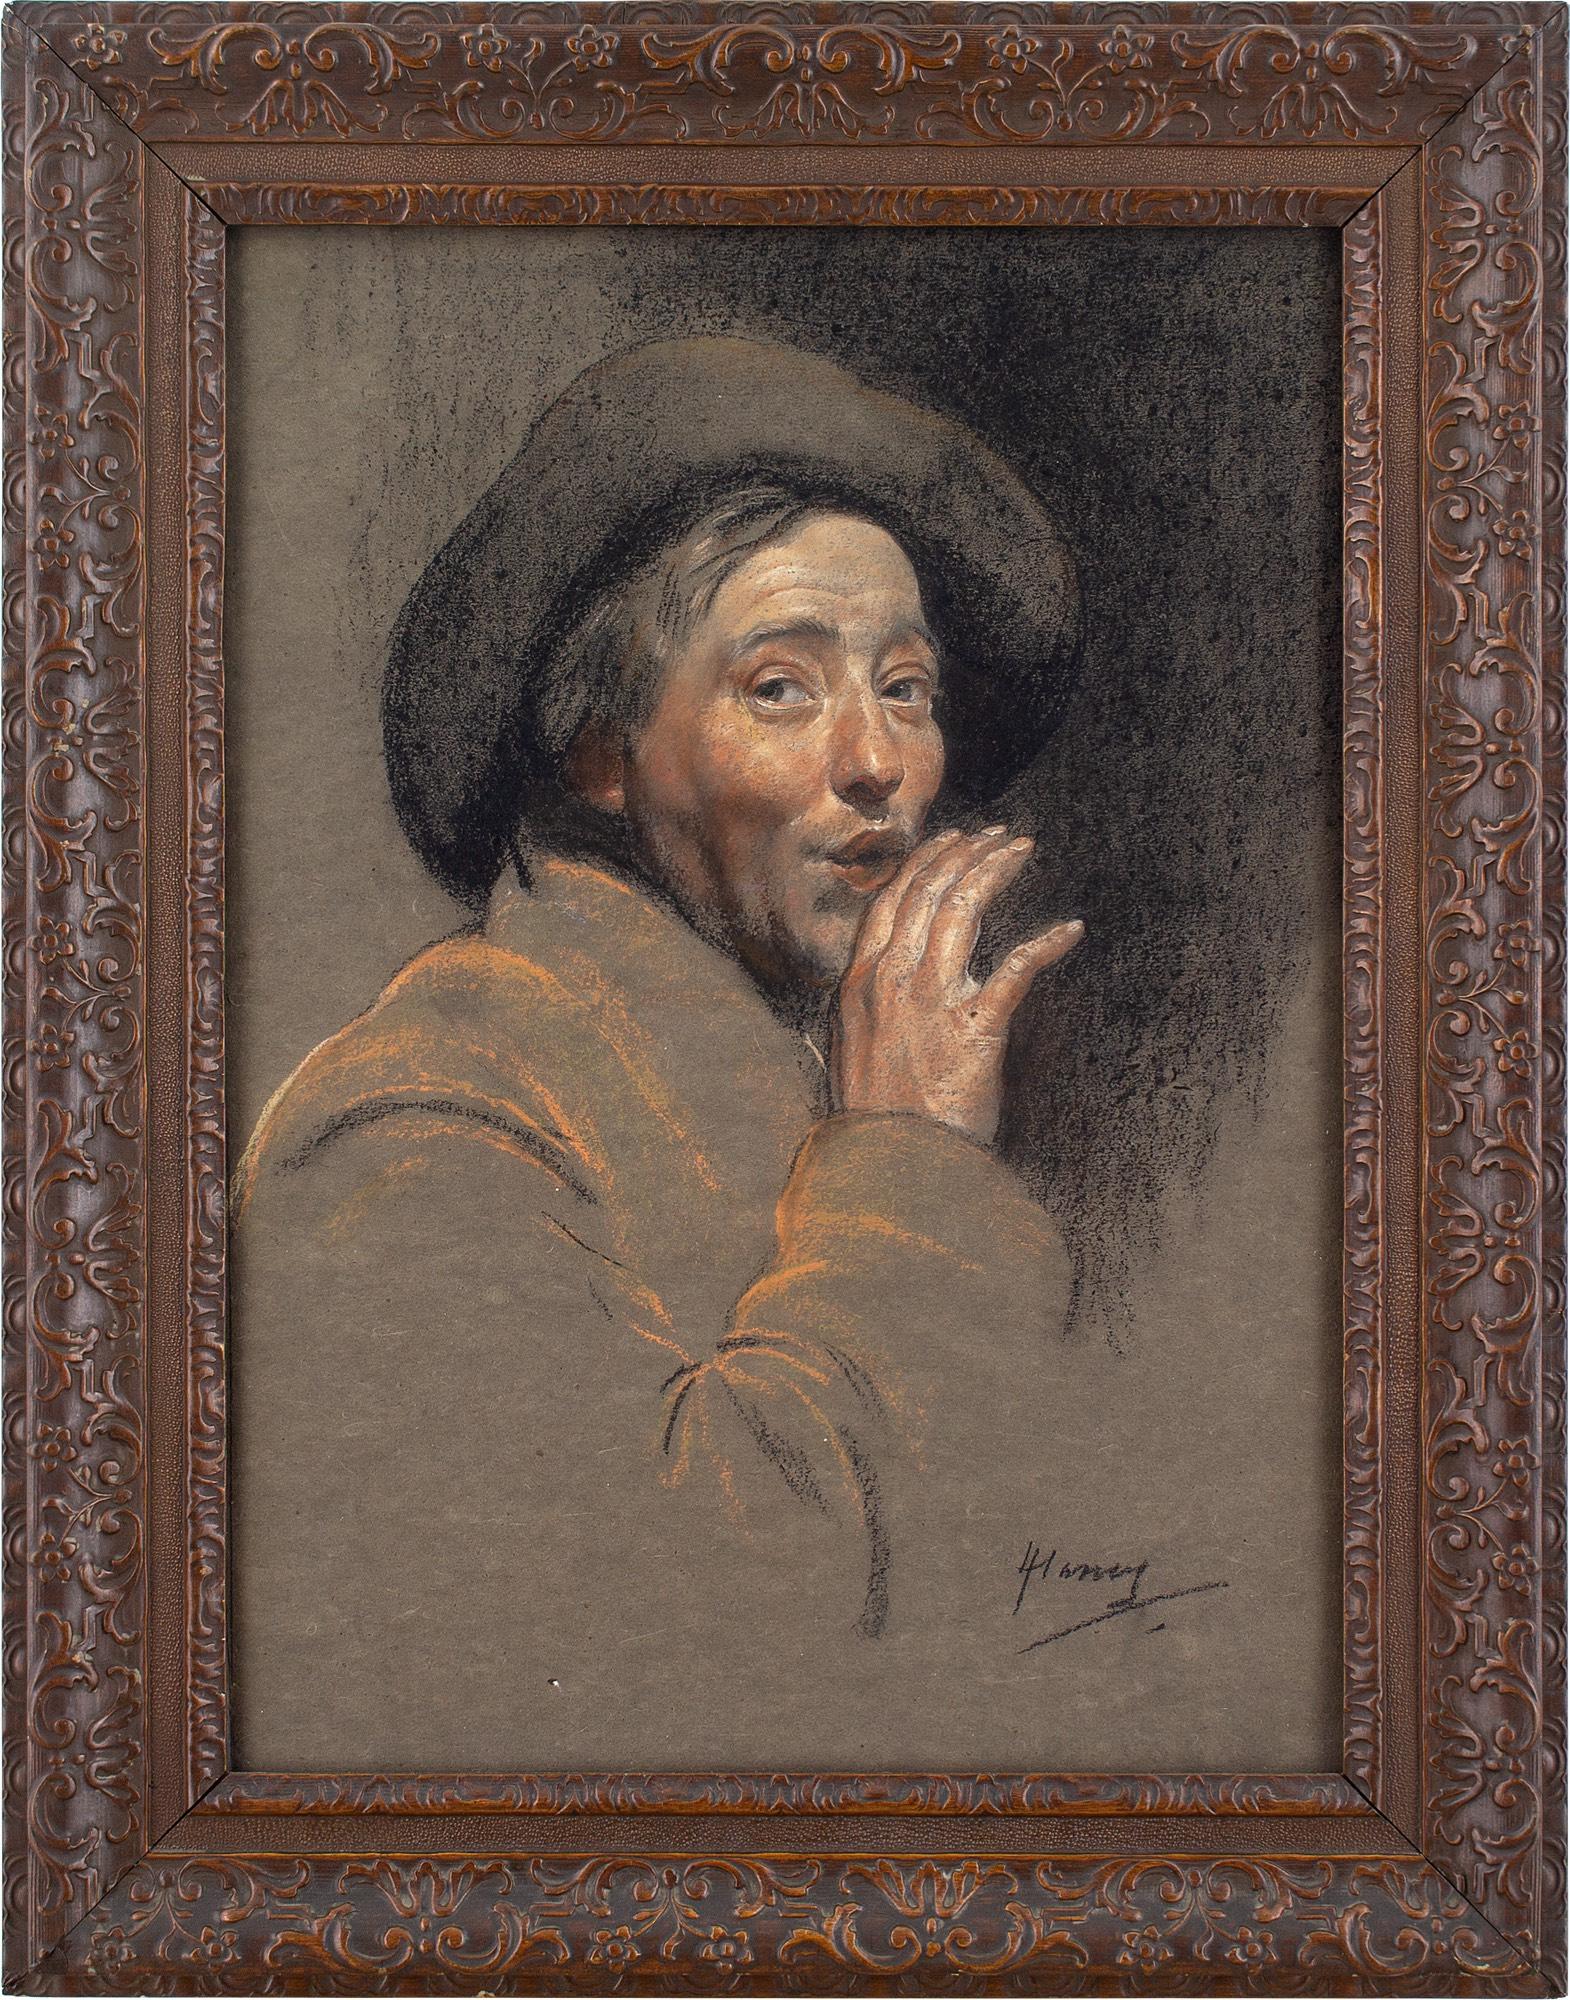 This early 20th-century pastel by Herbert Johnson Harvey (1884-1928) depicts the artist dressed in traditional peasant clothing while surreptitiously whispering.

Harvey carried an admiration for the old masters, which was instilled by his father,